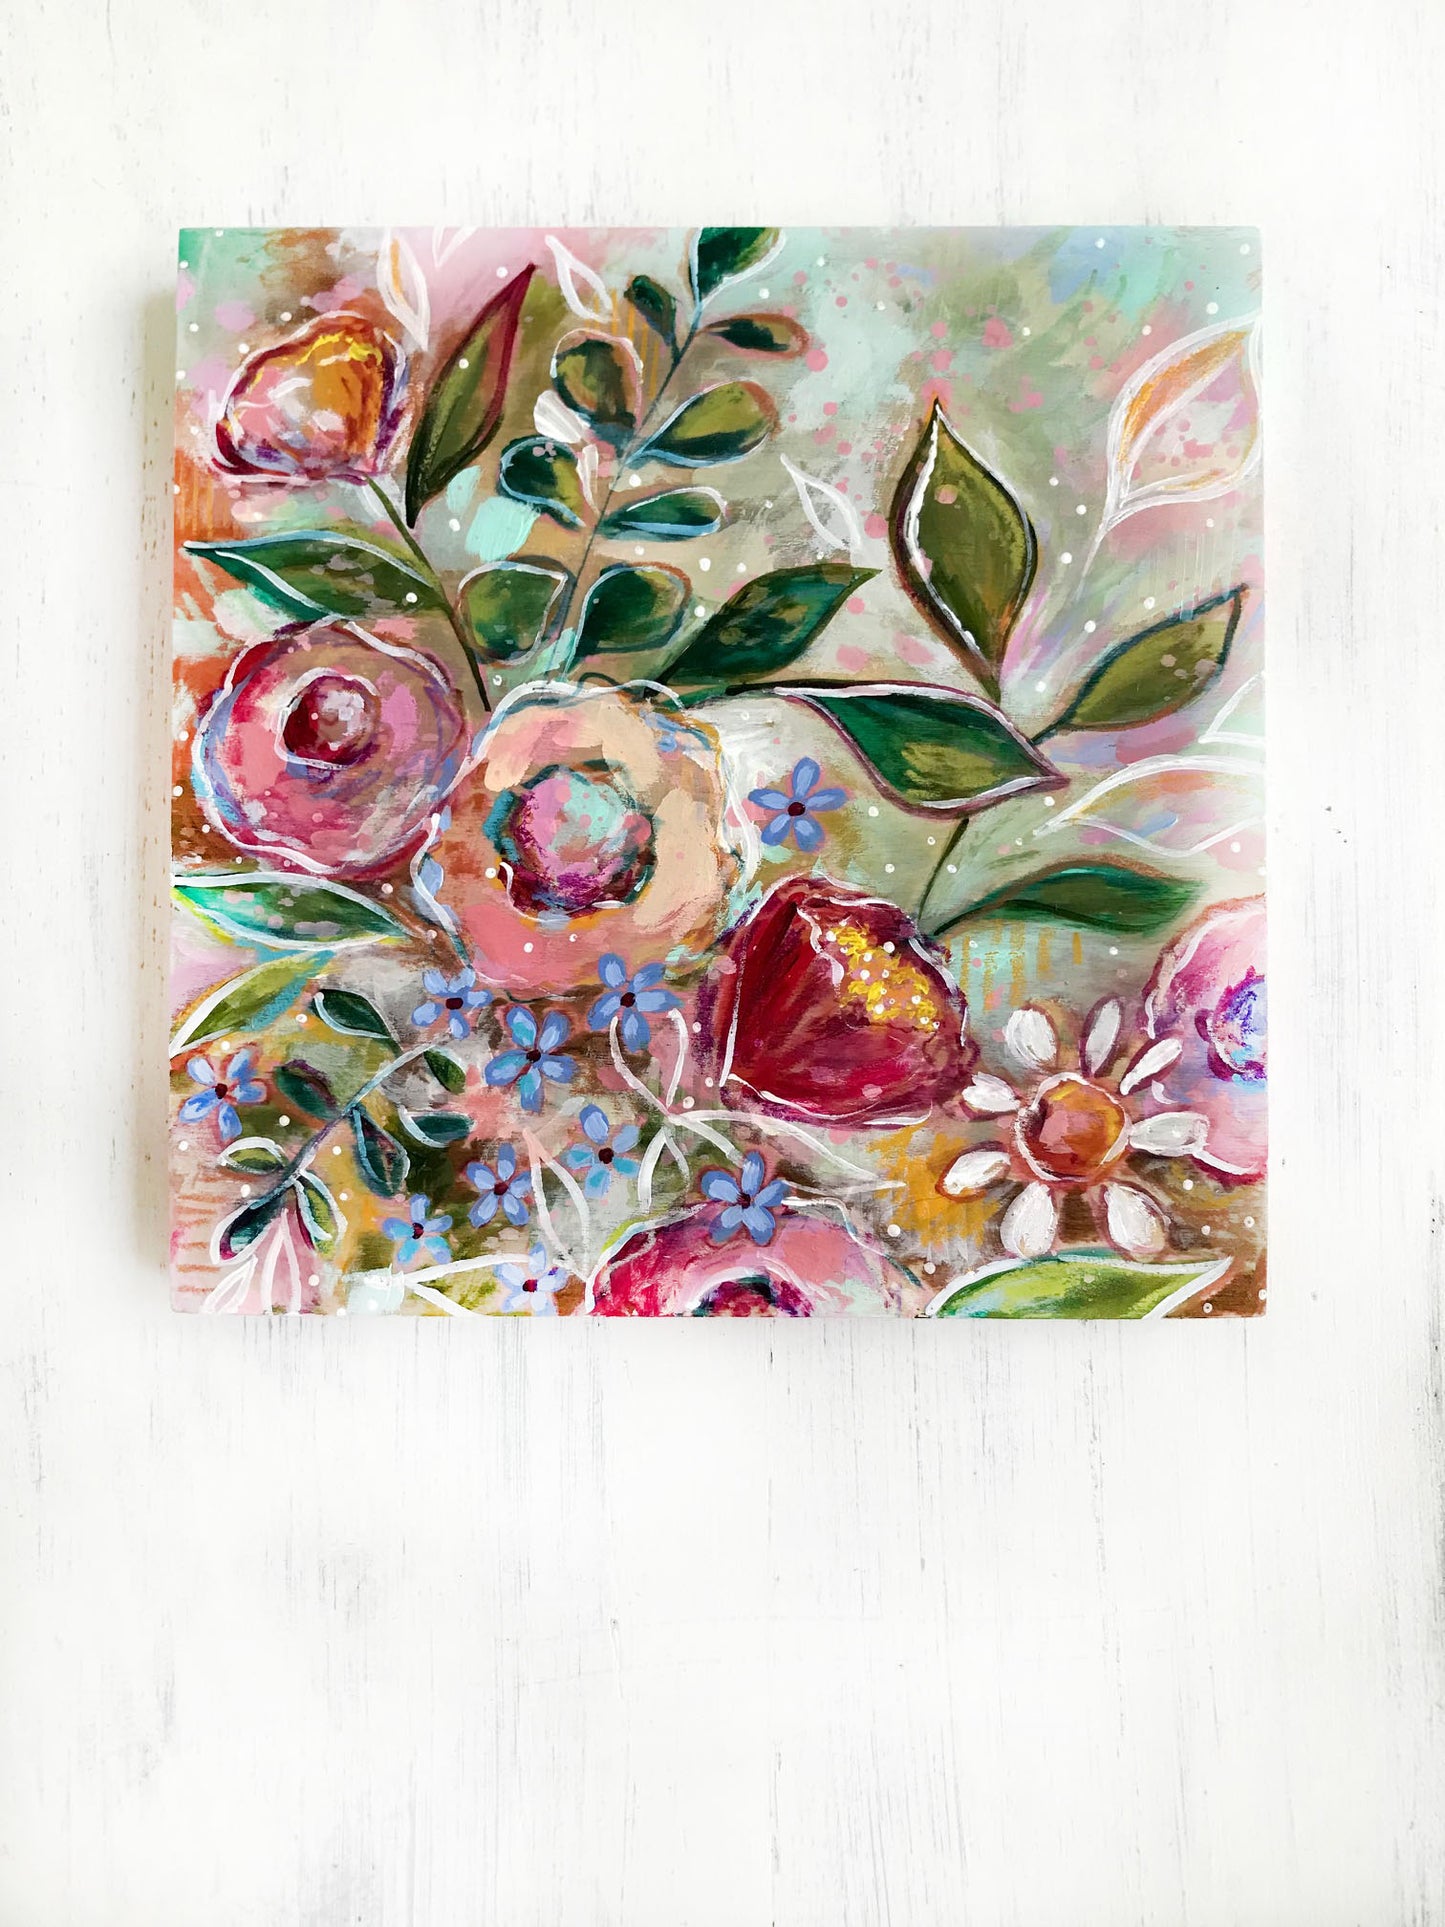 New Spring Floral Mixed Media Painting on 8x8 inch wood panel no.3 - Bethany Joy Art